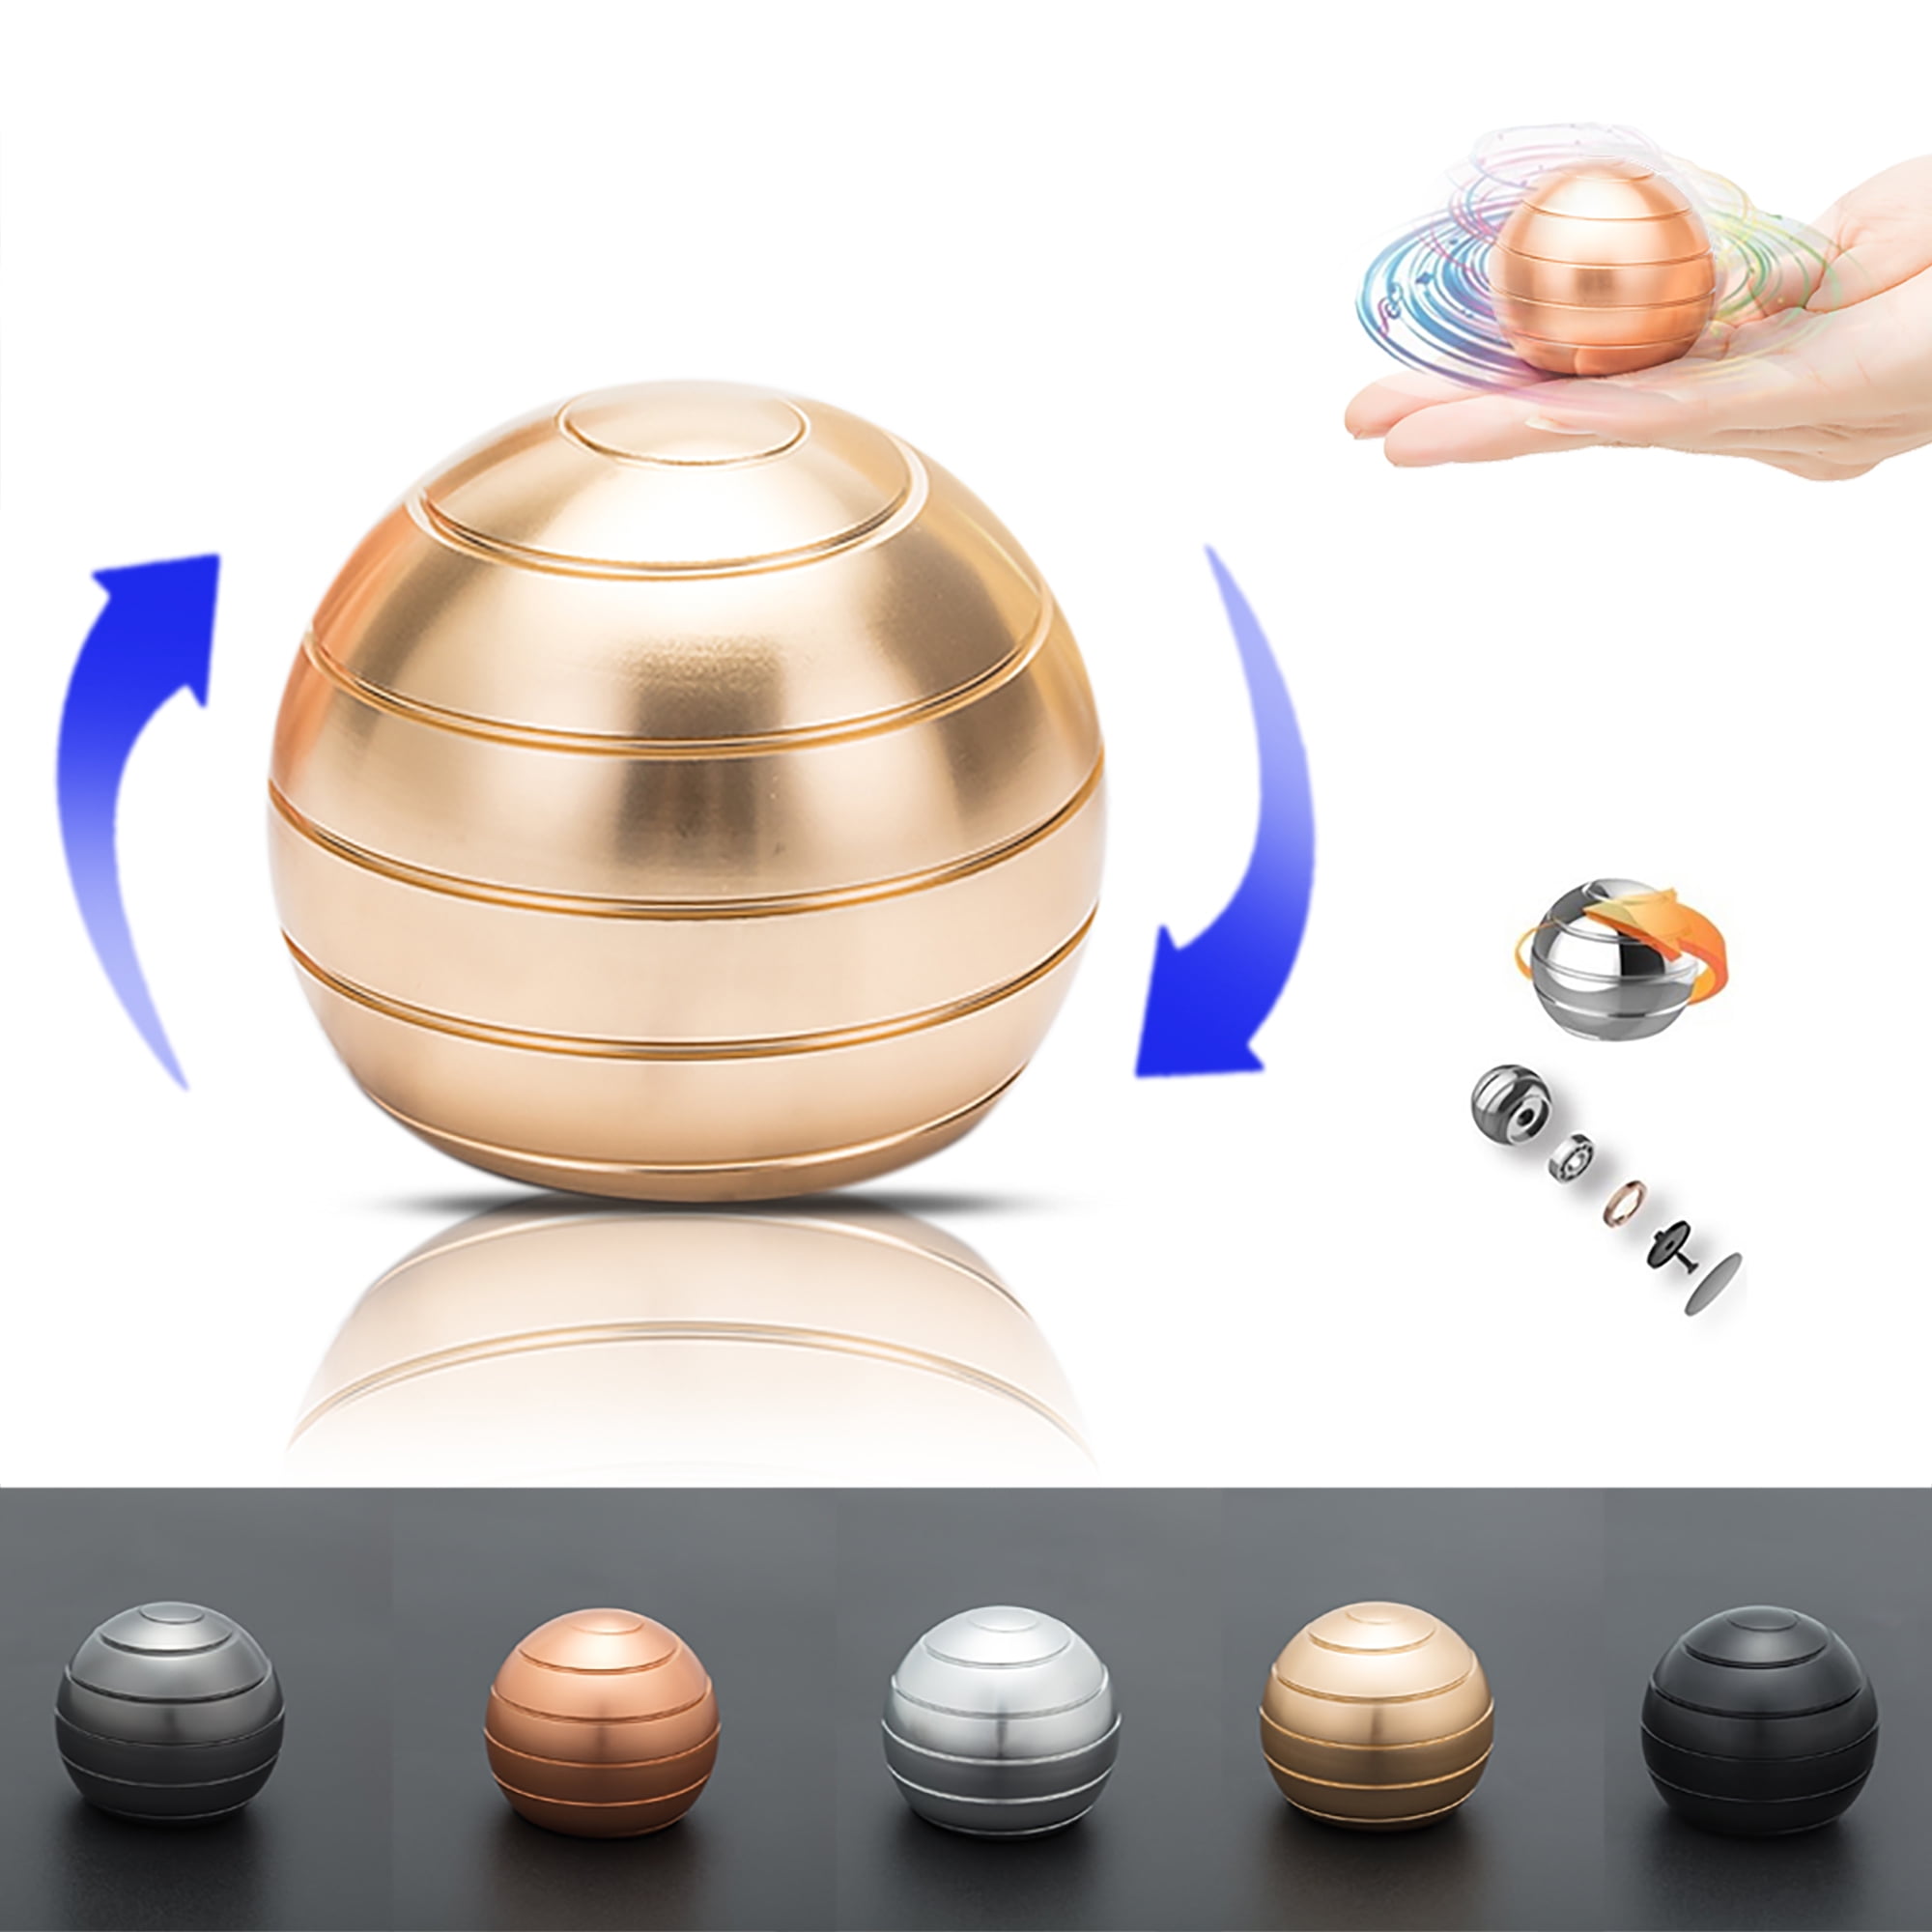 Kinetic Desk Ball Decompression Toy Spinning Tops Finger Rotating Gyro Home Gift 